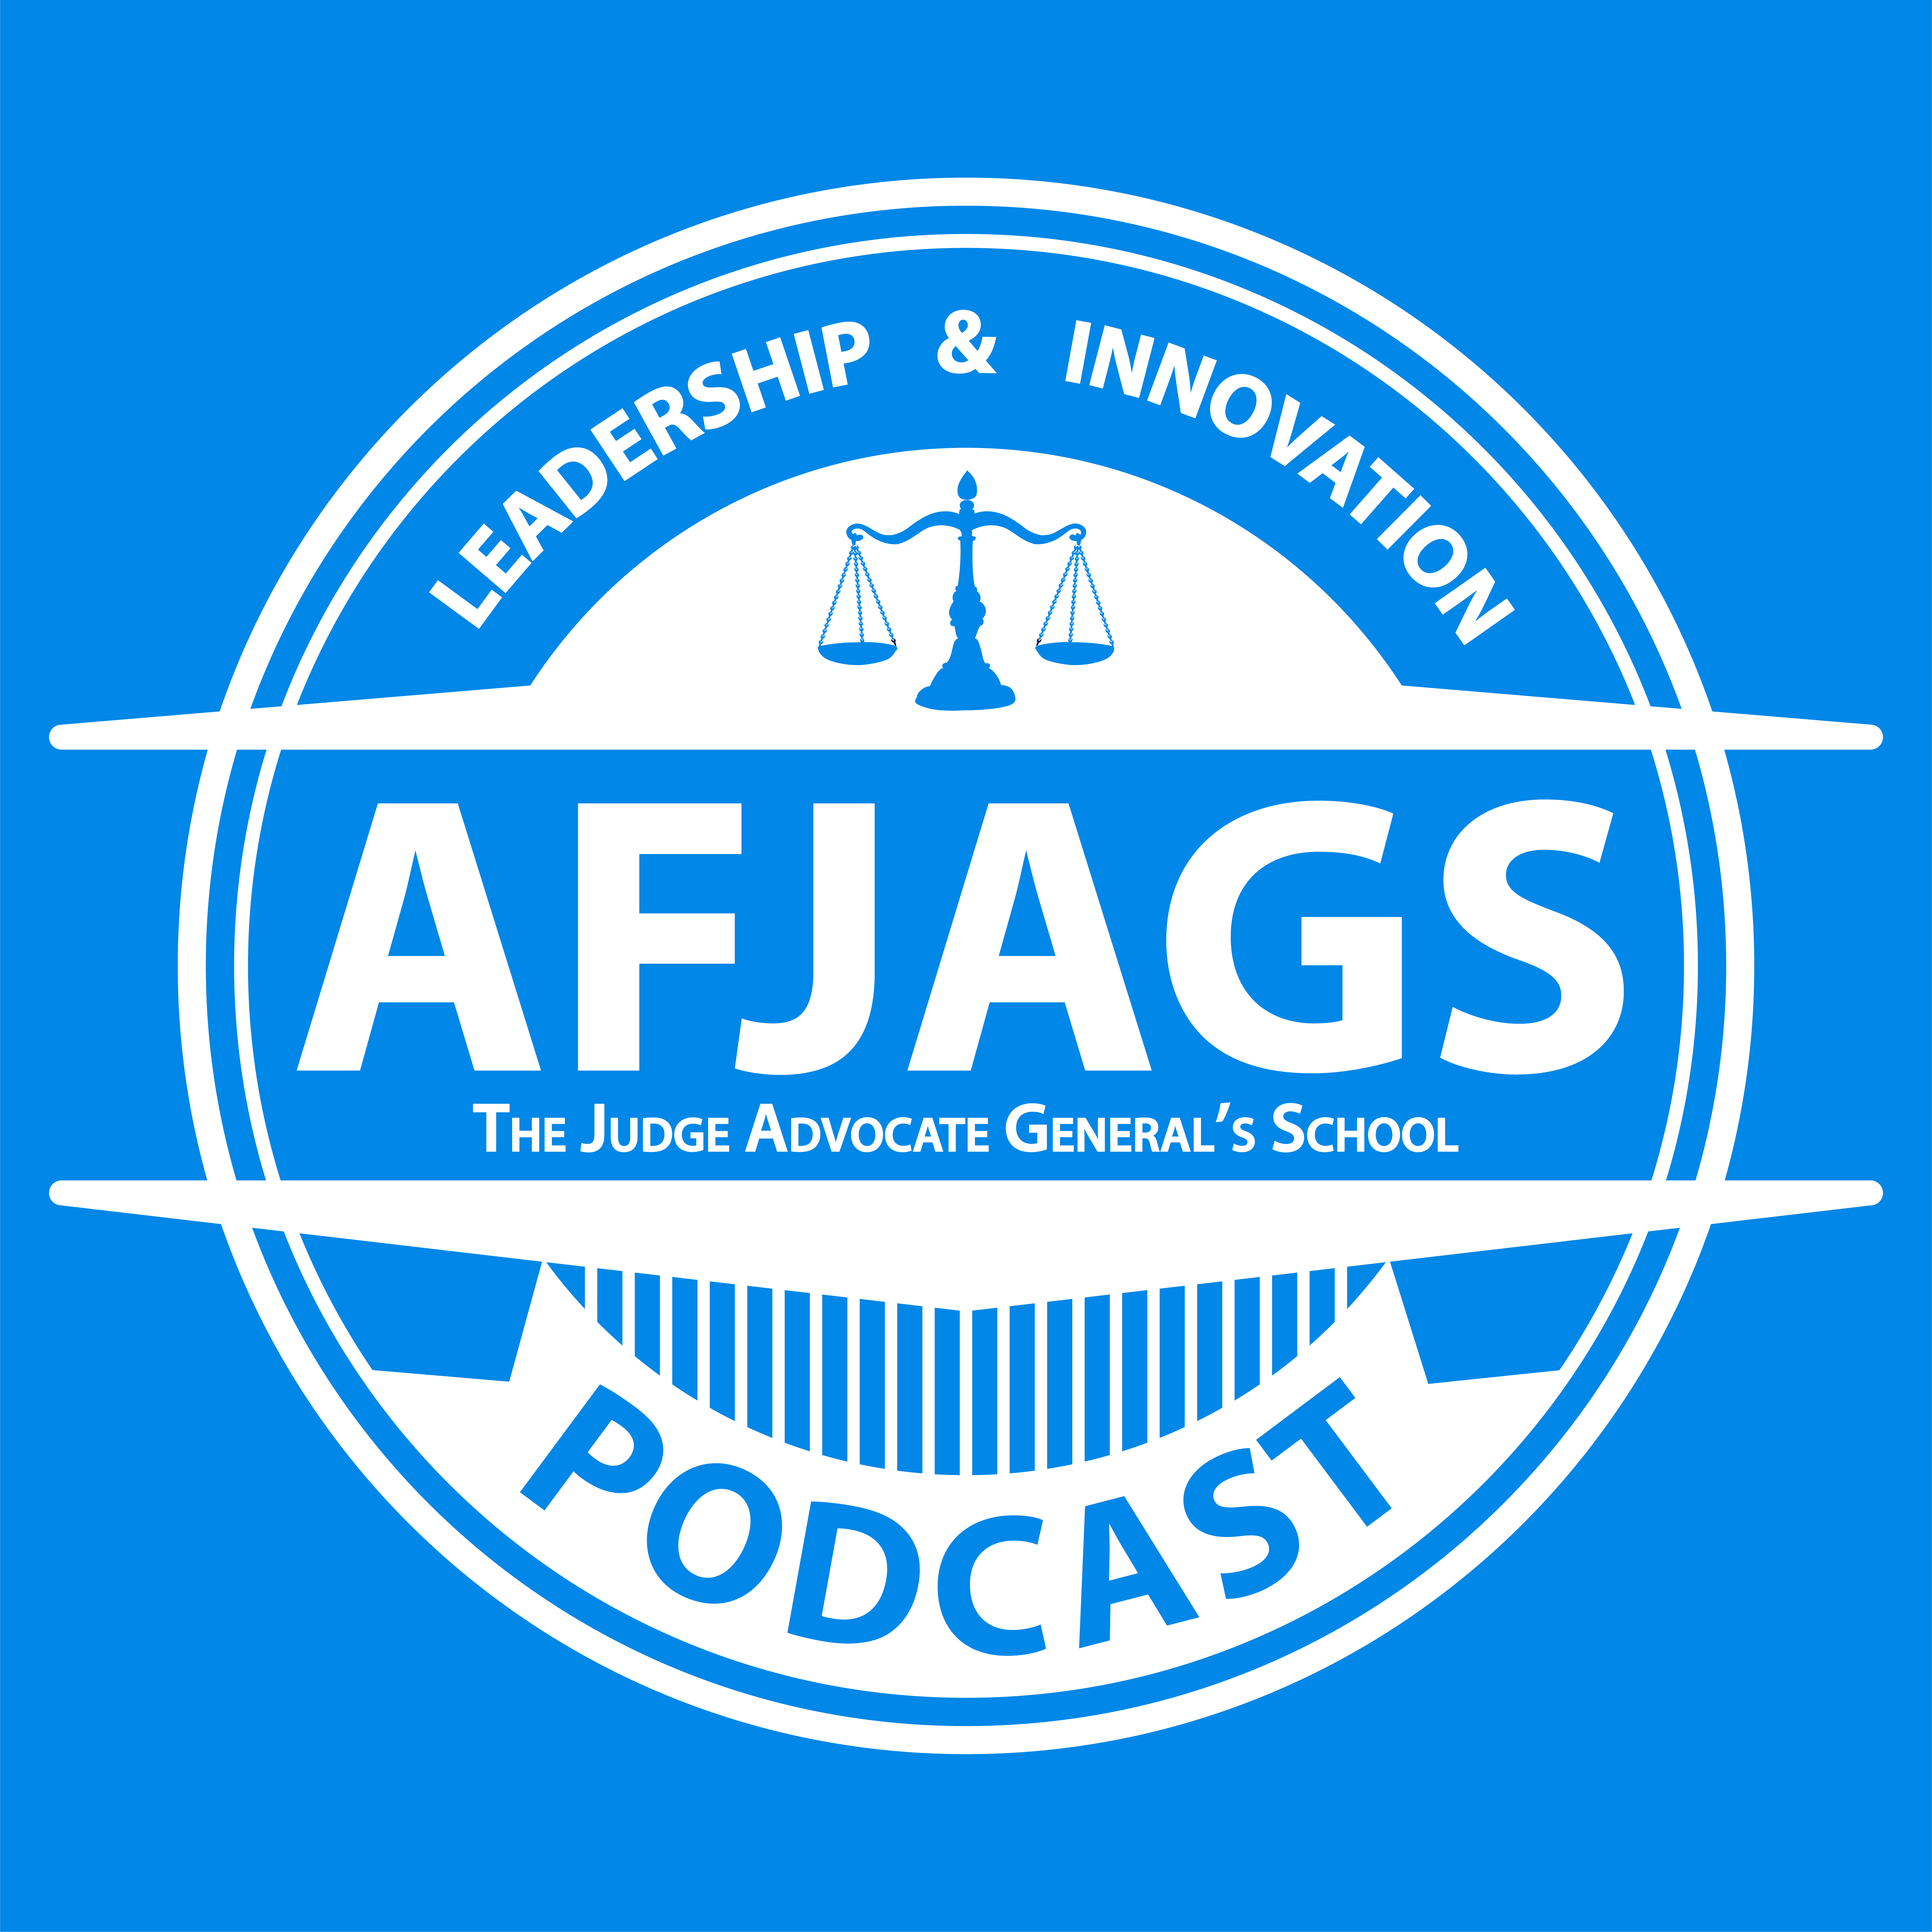 AFJAGS Podcast